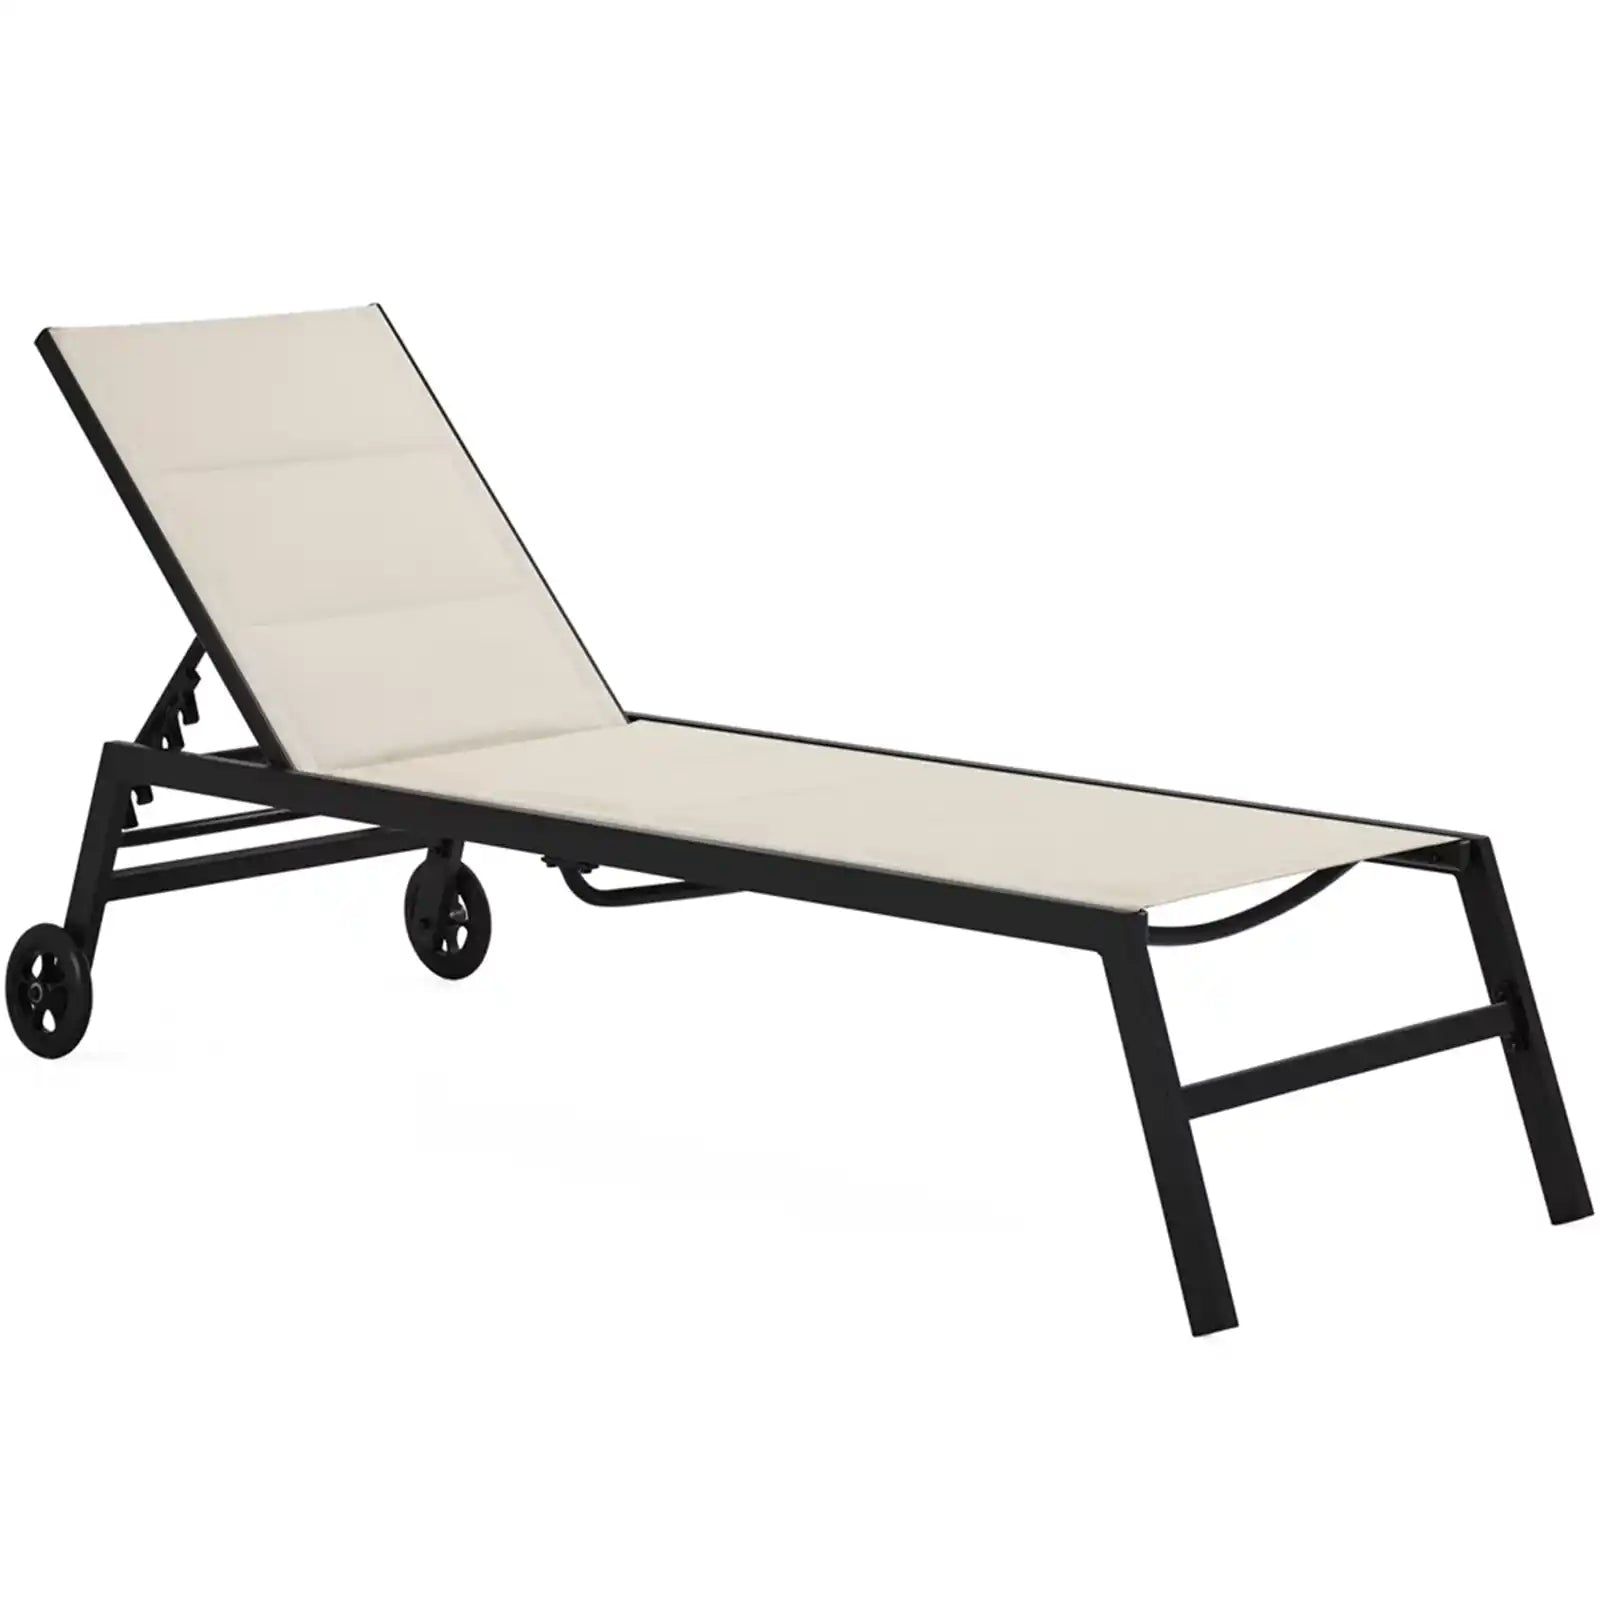 Thickened Texteline Portable Chaise Lounge with Wheels